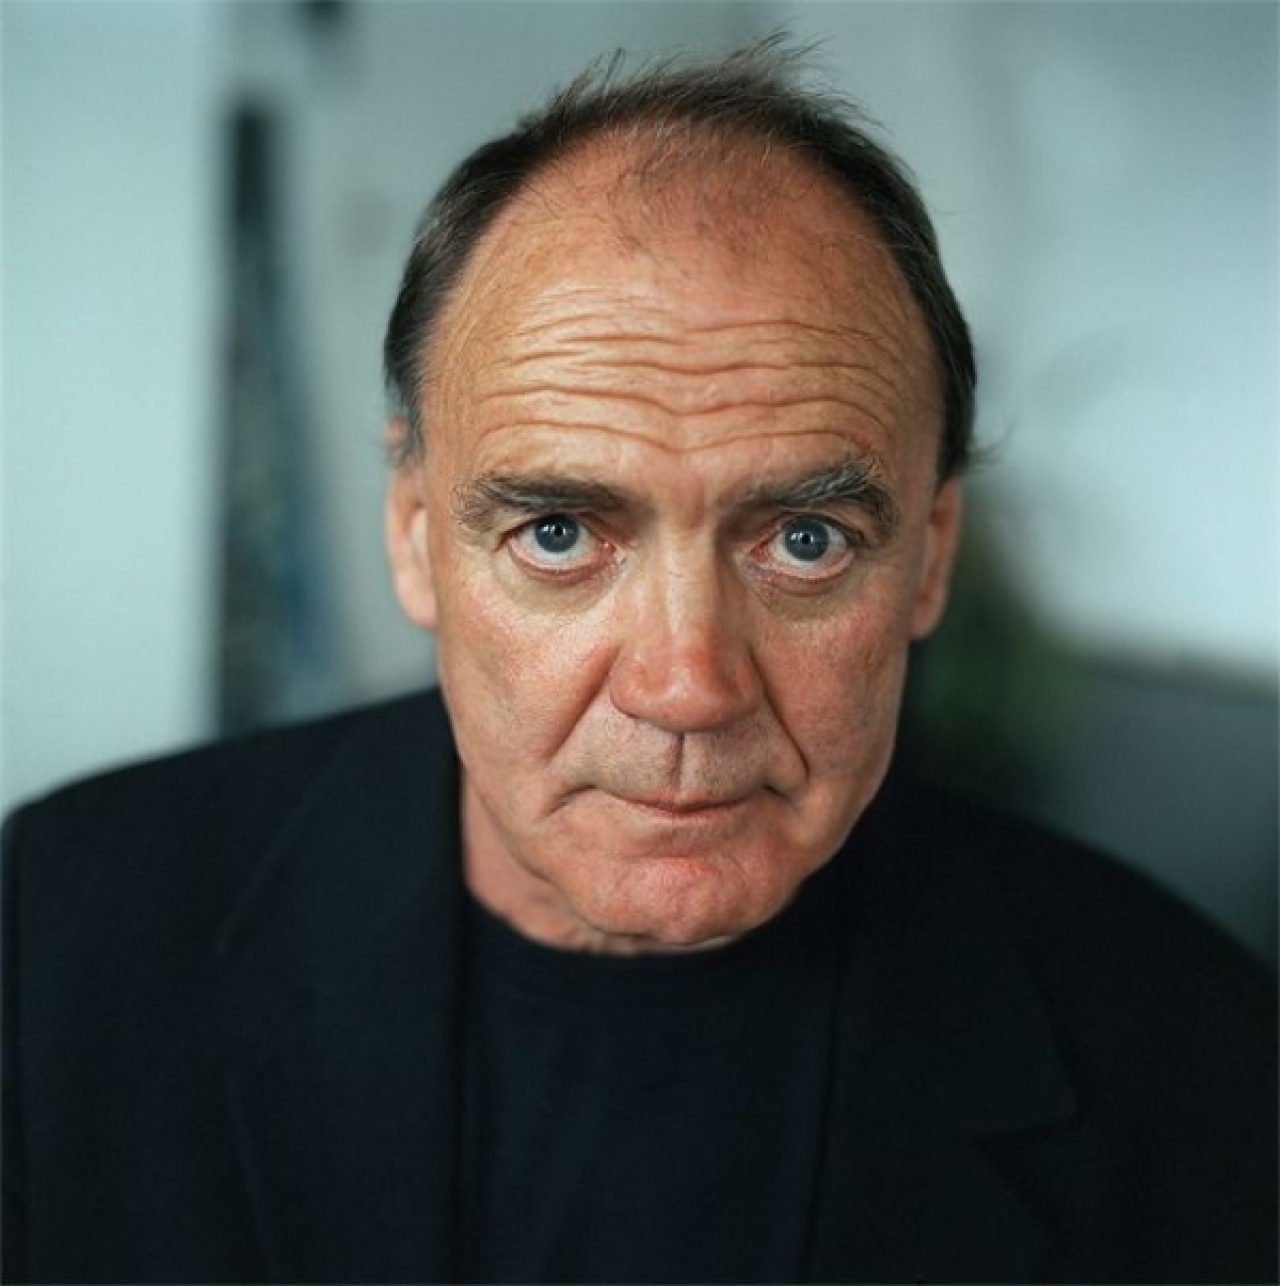 The great actor Bruno Ganz passed away